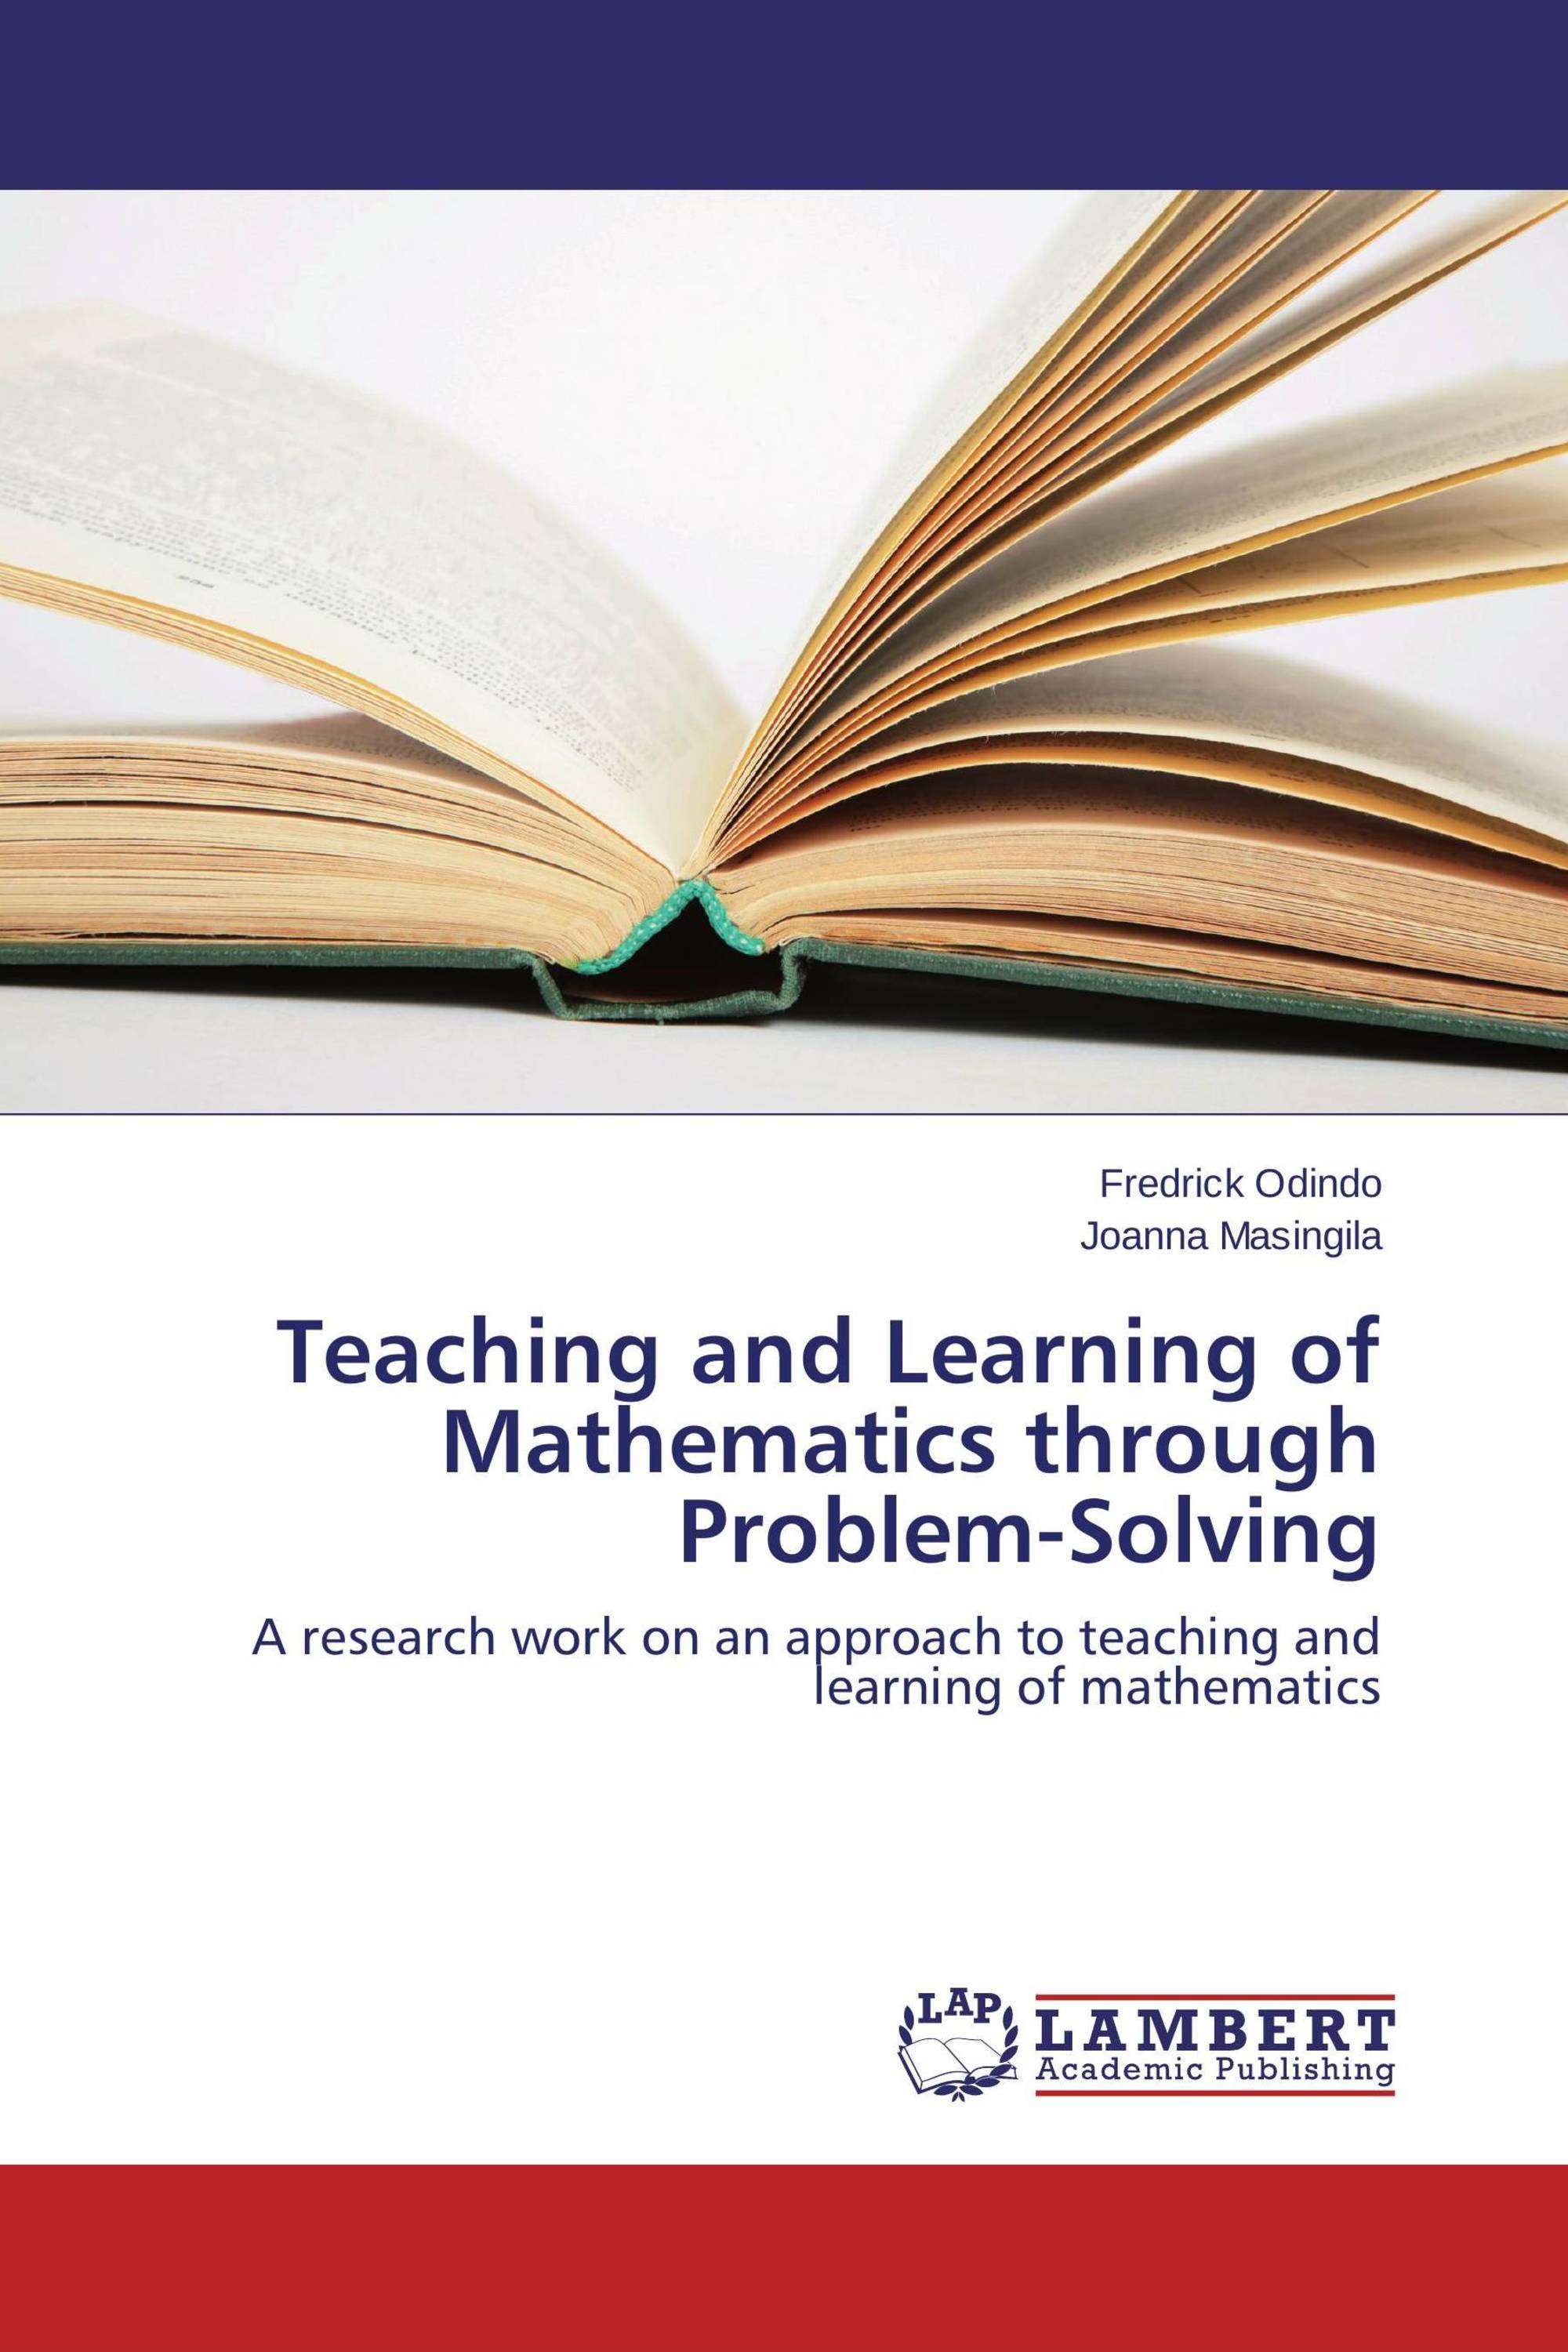 Teaching and Learning of Mathematics through Problem-Solving